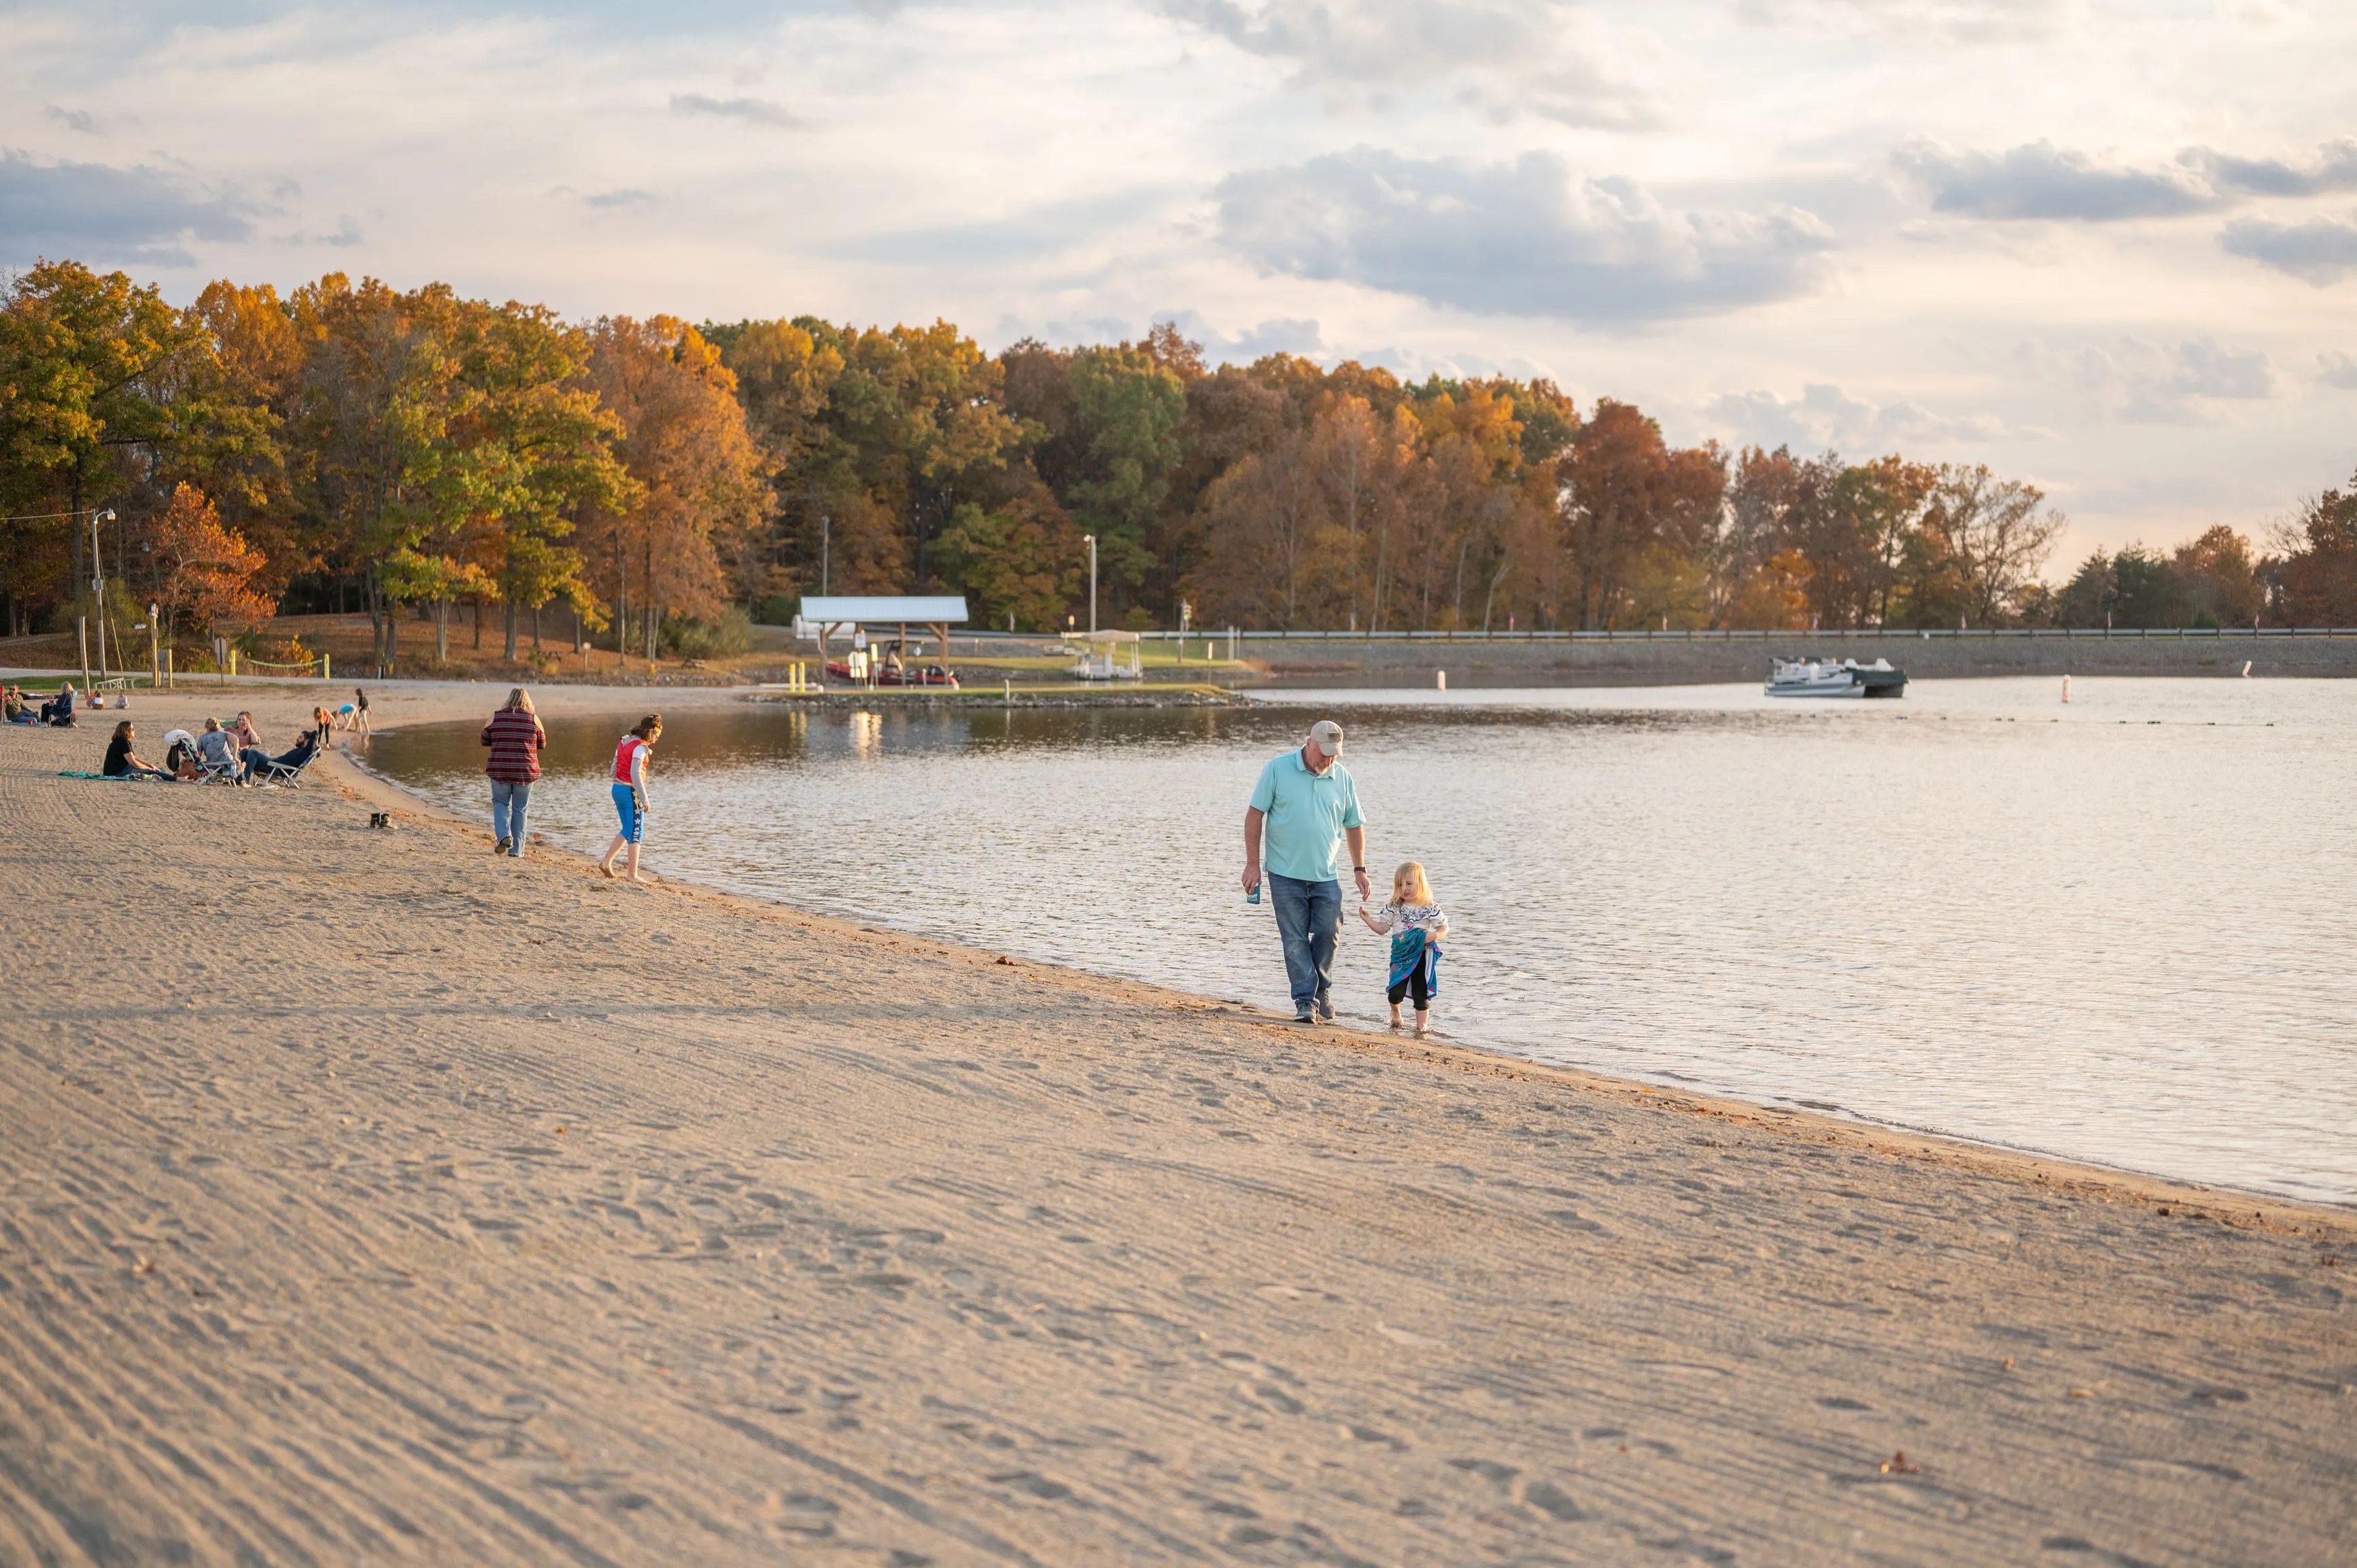 An adult and a child walking hand in hand on a sandy beach with other visitors and autumn trees in the background.